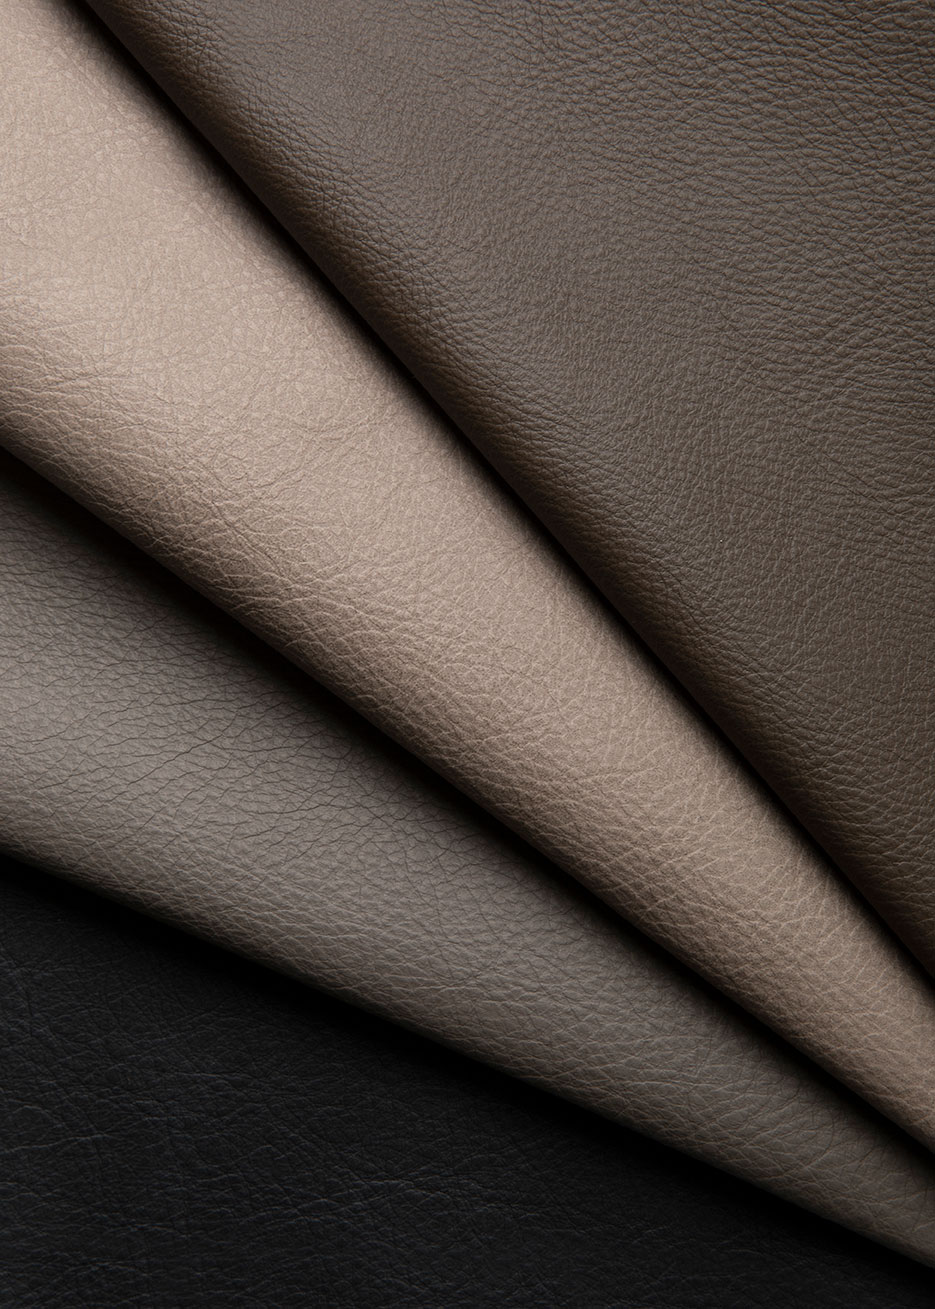 NUANCE is a protected leather developed in close collaboration with Space Copenhagen.